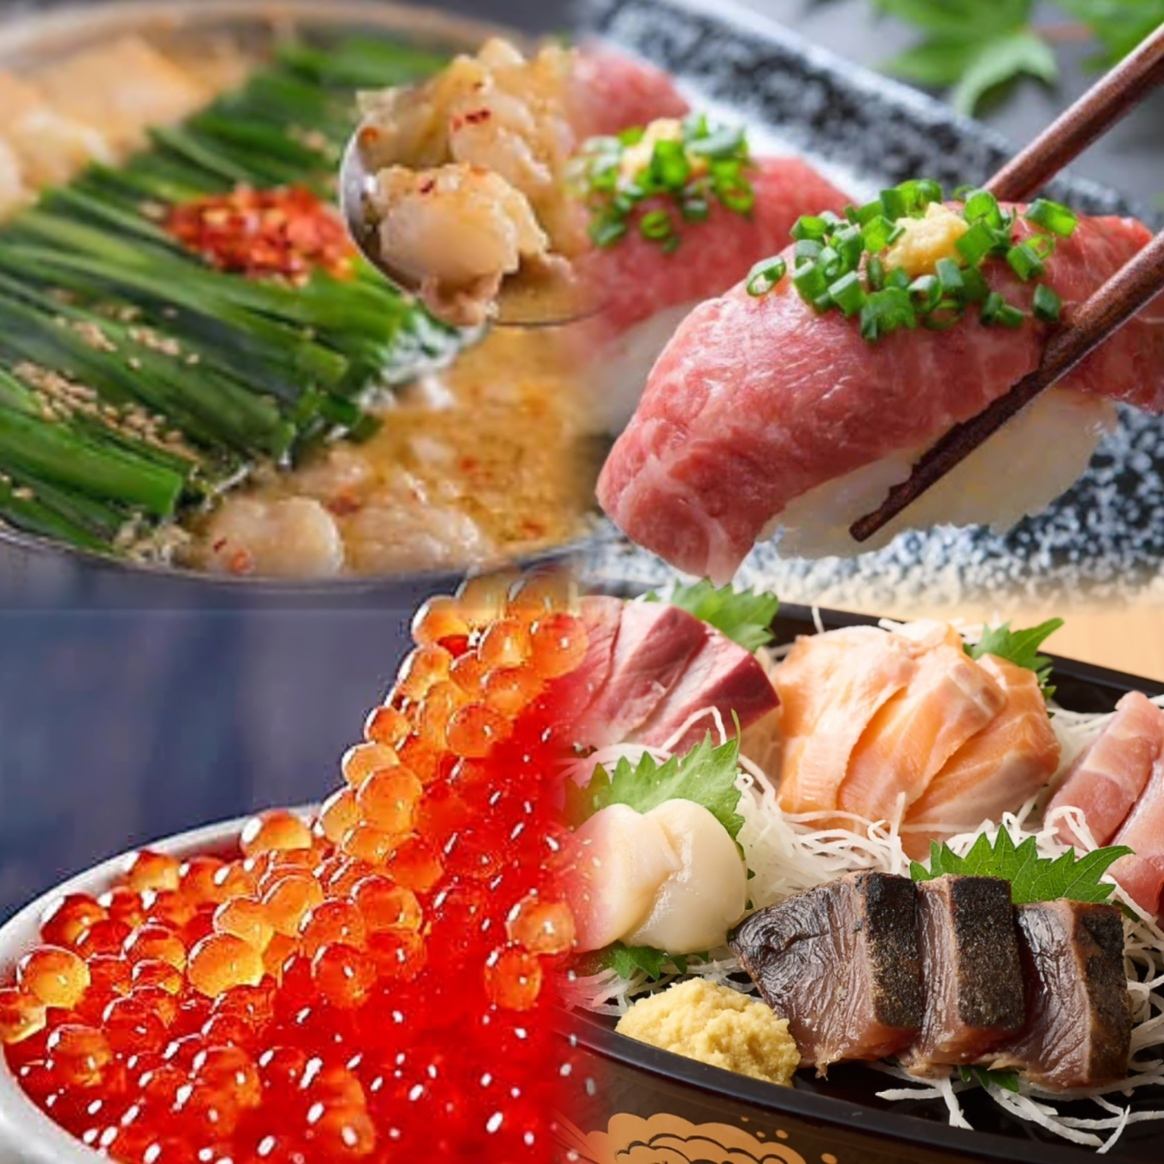 Leave the meat and fish to us!Enjoy a wide variety of a la carte dishes♪